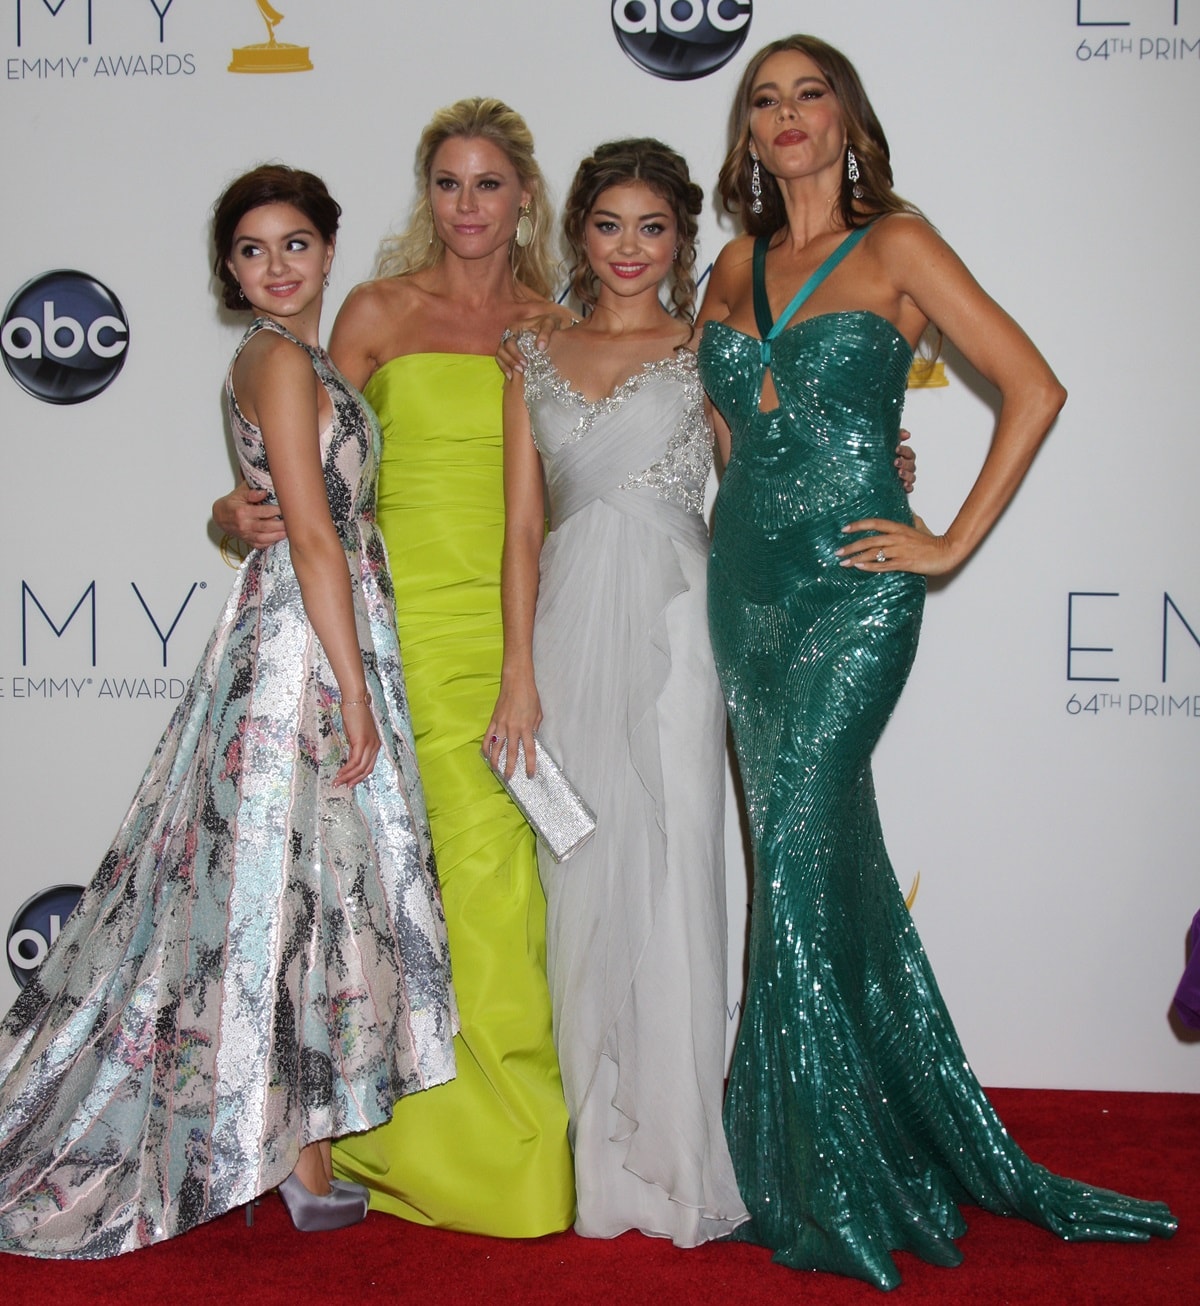 Julie Bowen, Ariel Winter, Aubrey Anderson-Emmons, Sarah Hyland, and Sofia Vergara pose in the press room at the 64th Primetime Emmy Awards